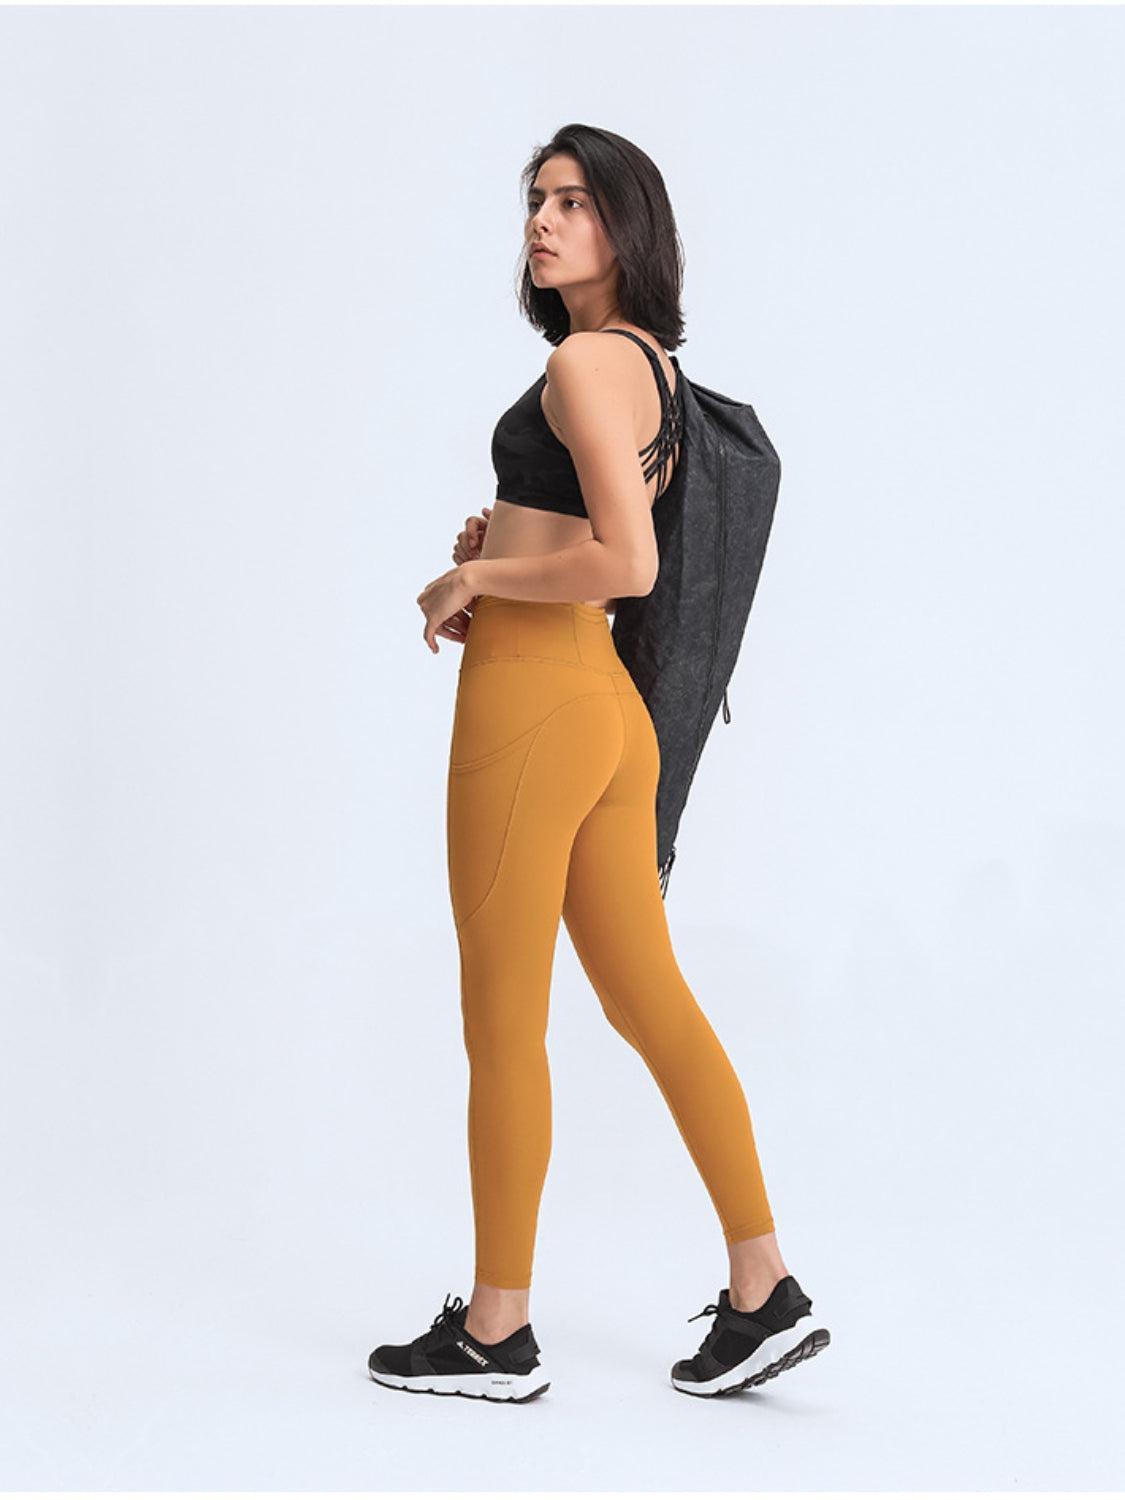 a woman in a black top and yellow leggings